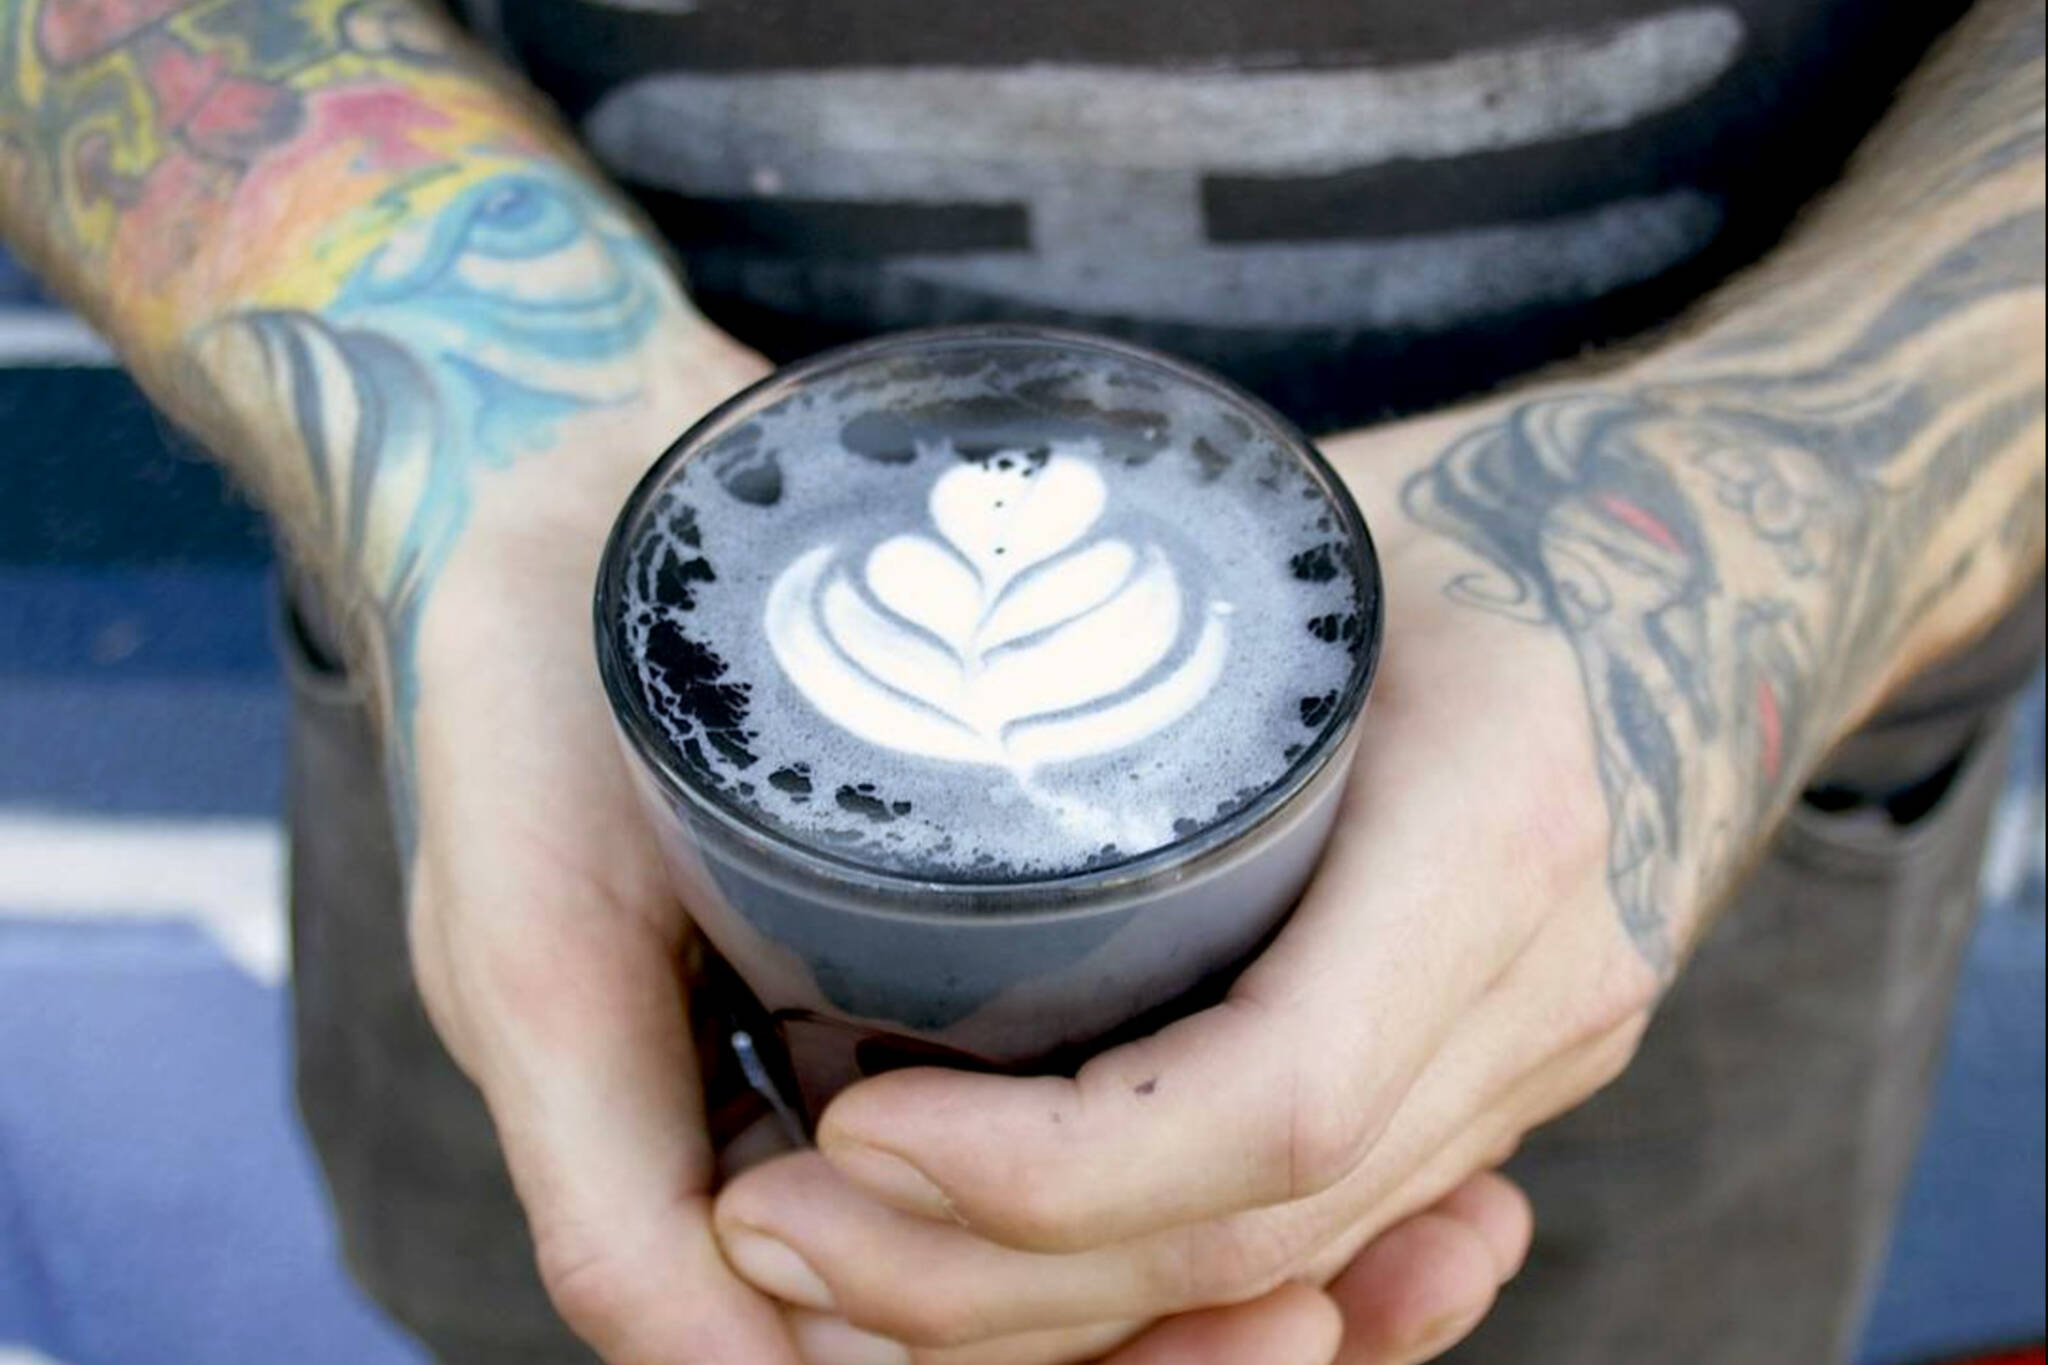 The goth latte  has arrived in Toronto